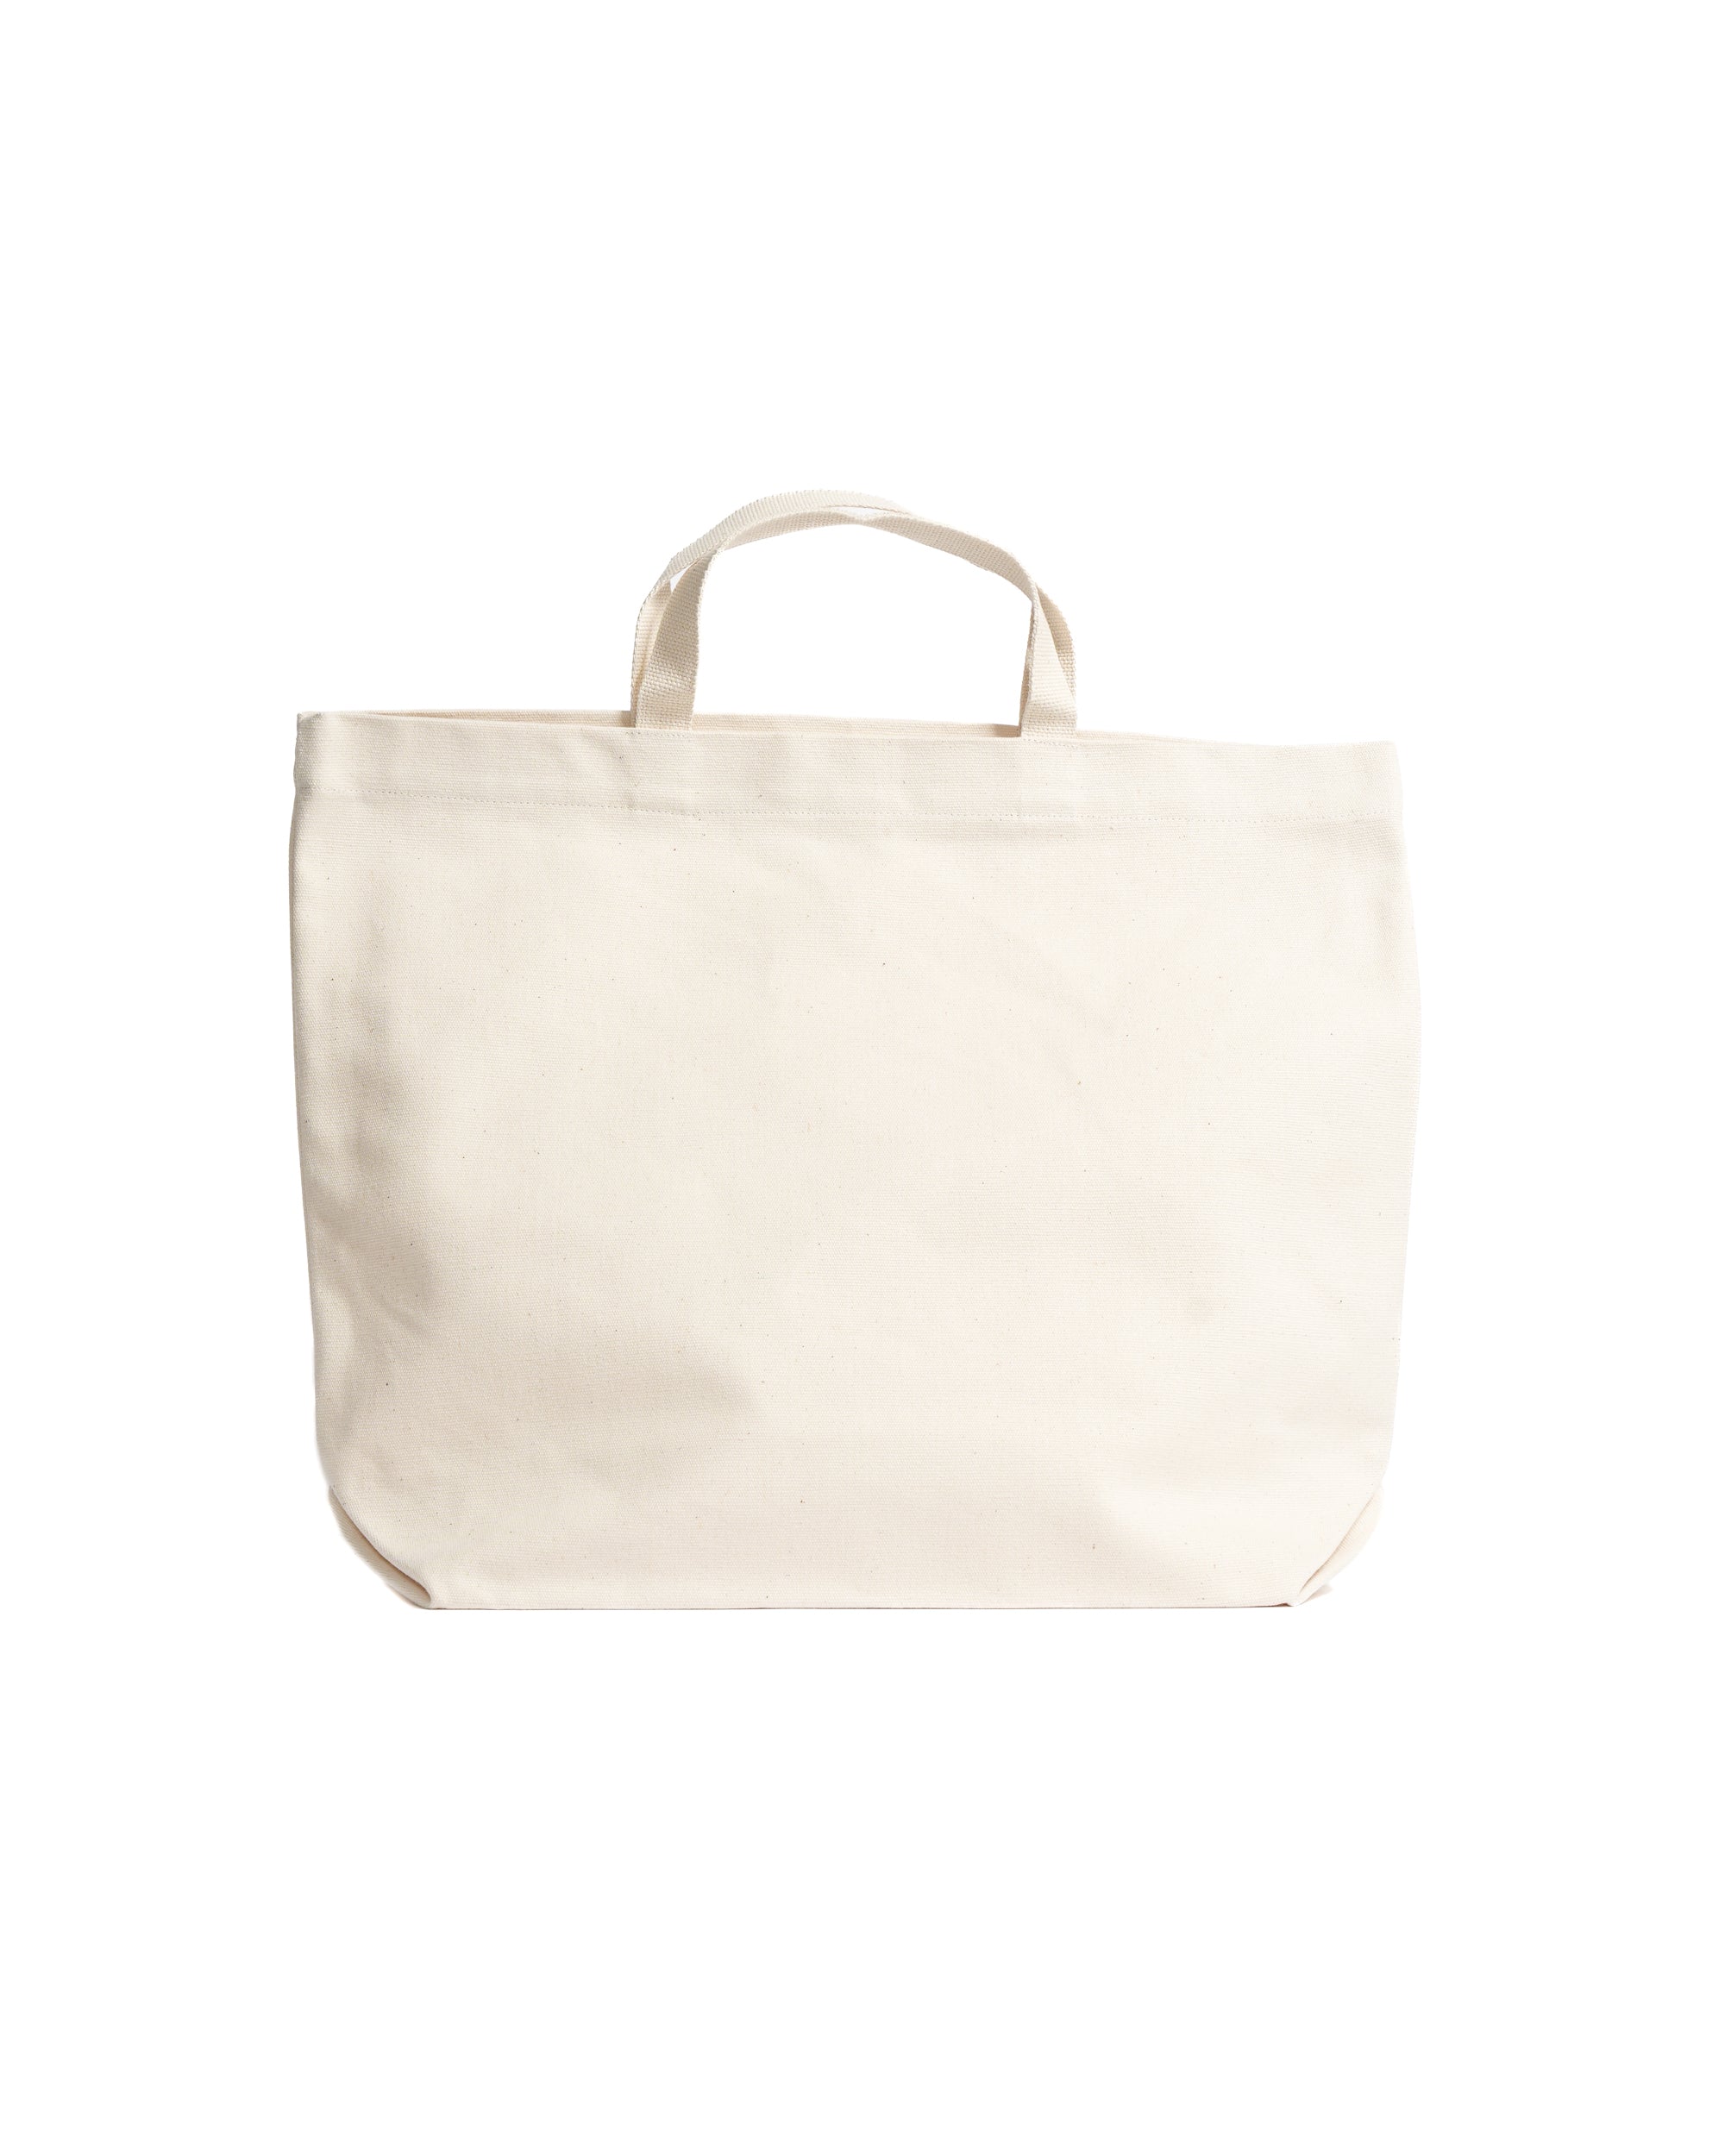 EG Canvas Tote Bag - Natural - Recycled Assorted